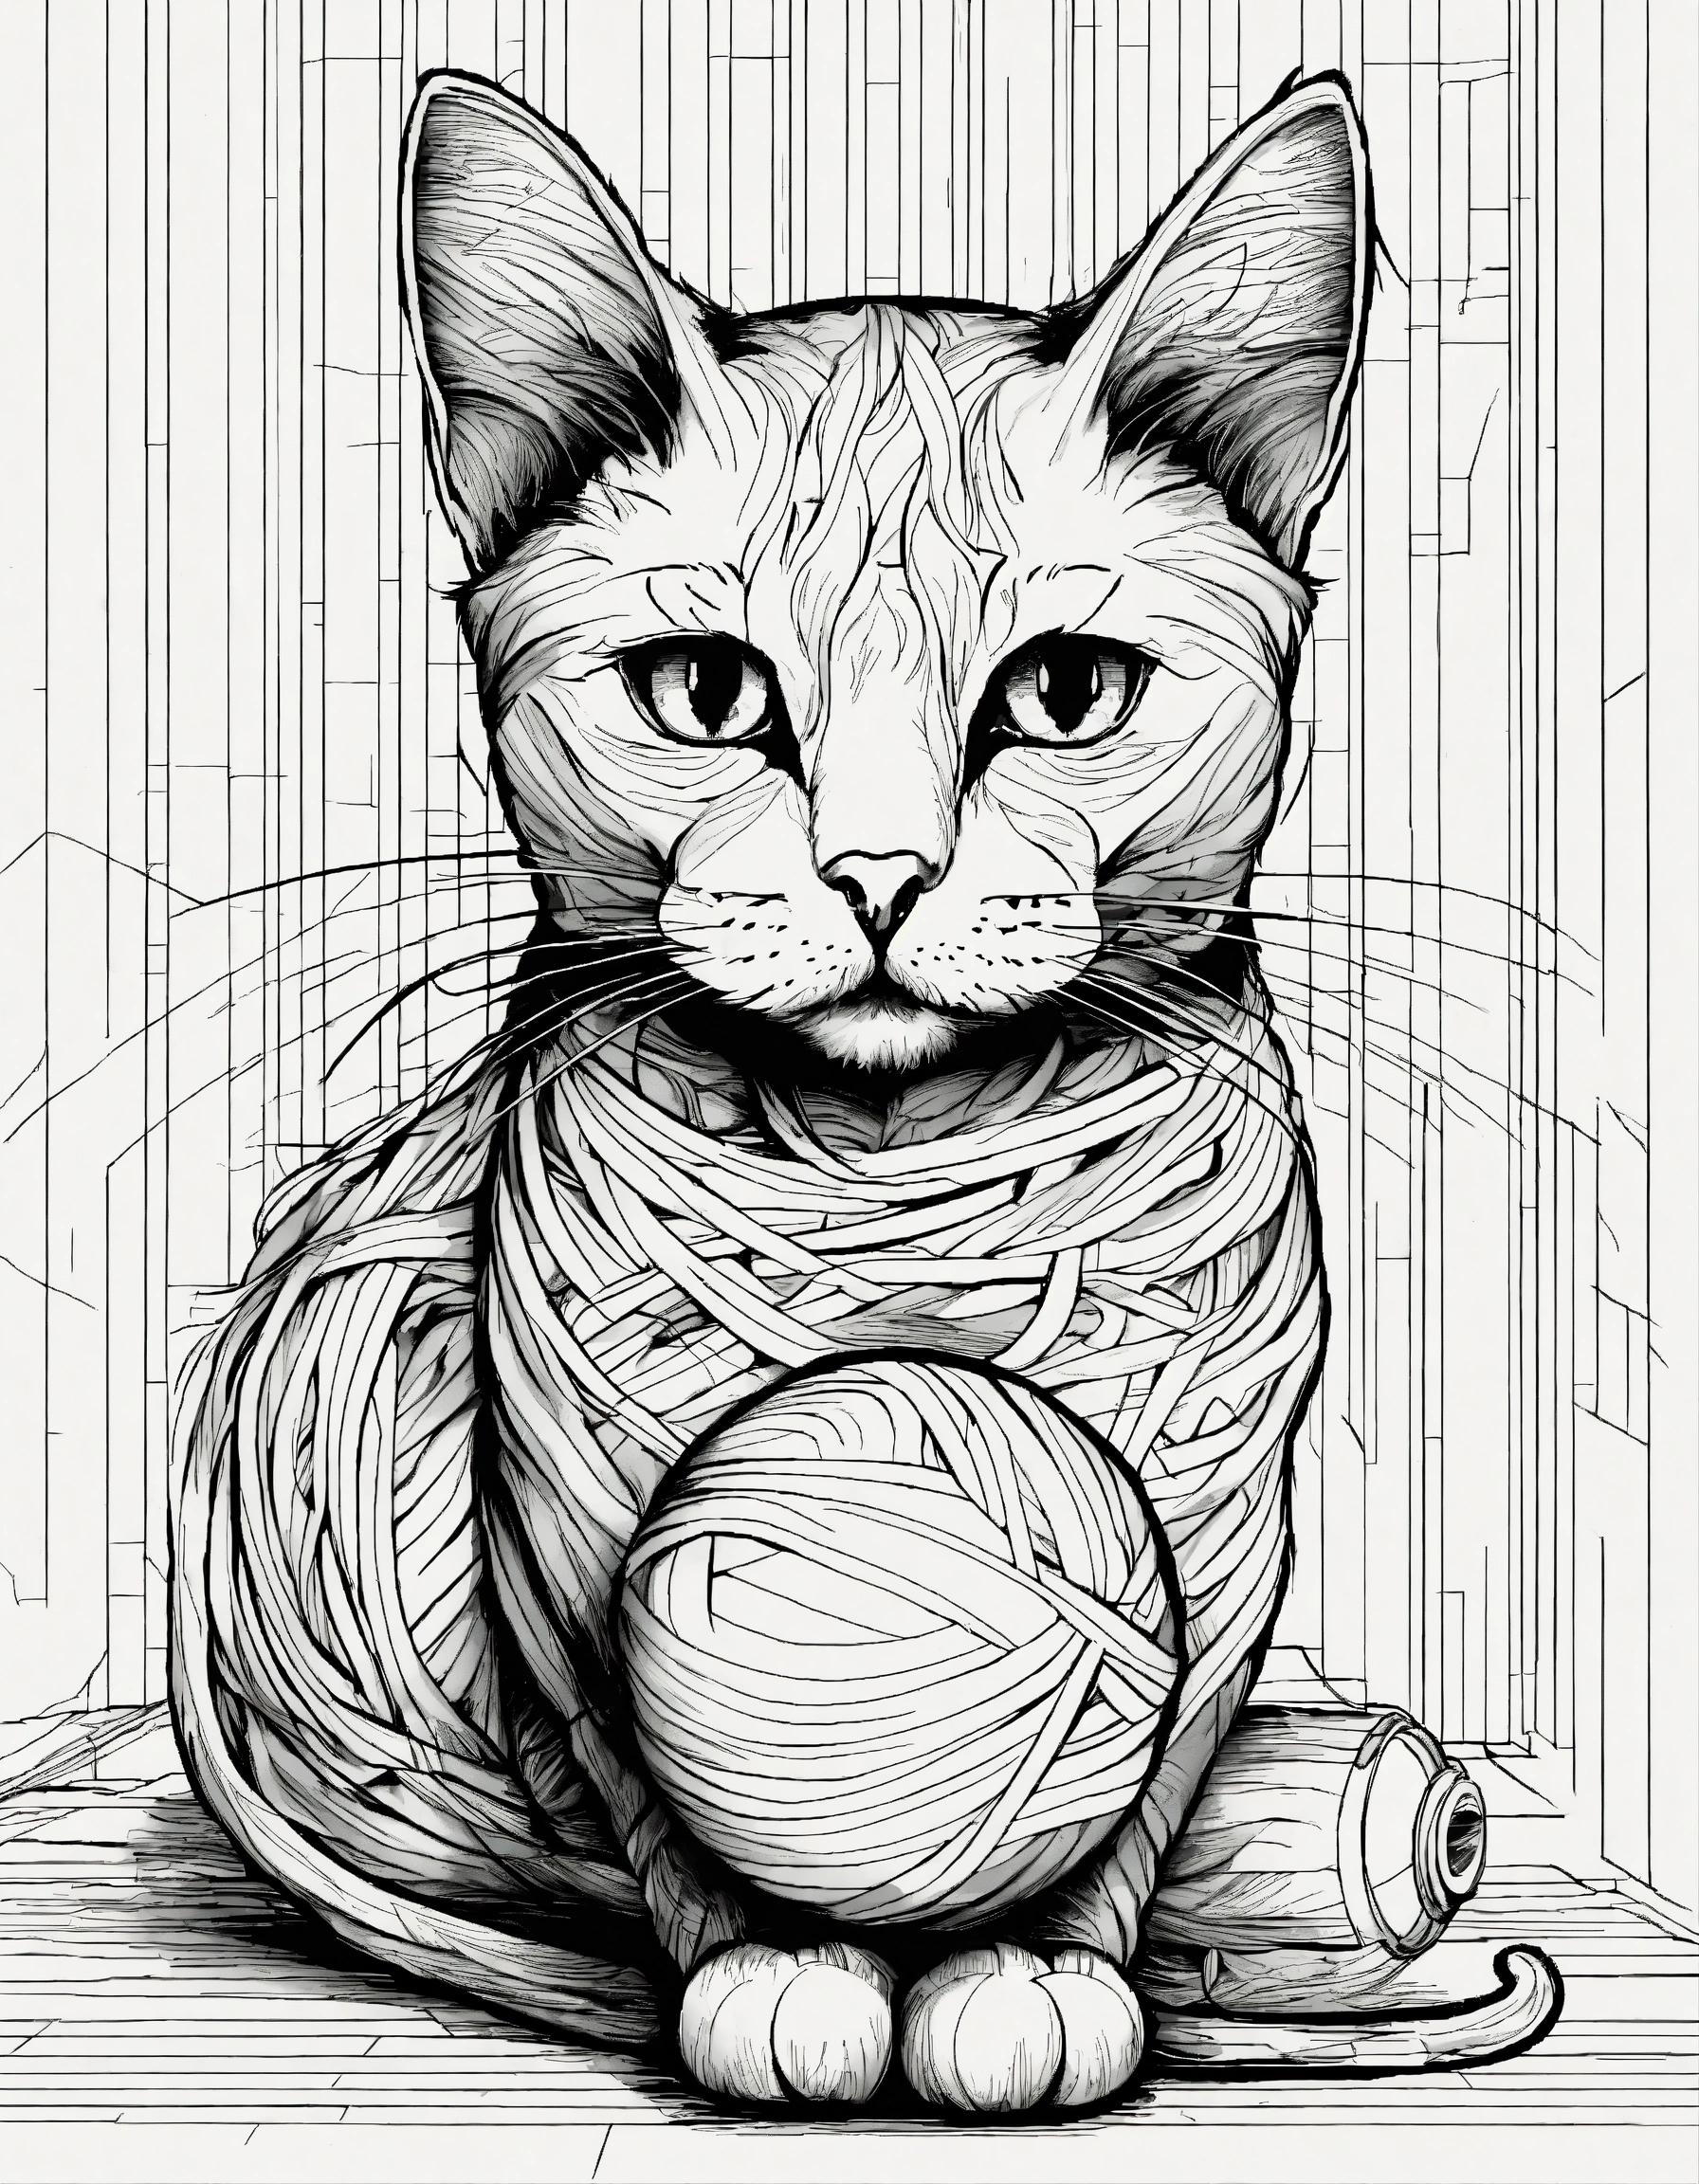 Lexica - Very detailed cat playing with ball of yarn, color book, bold ...